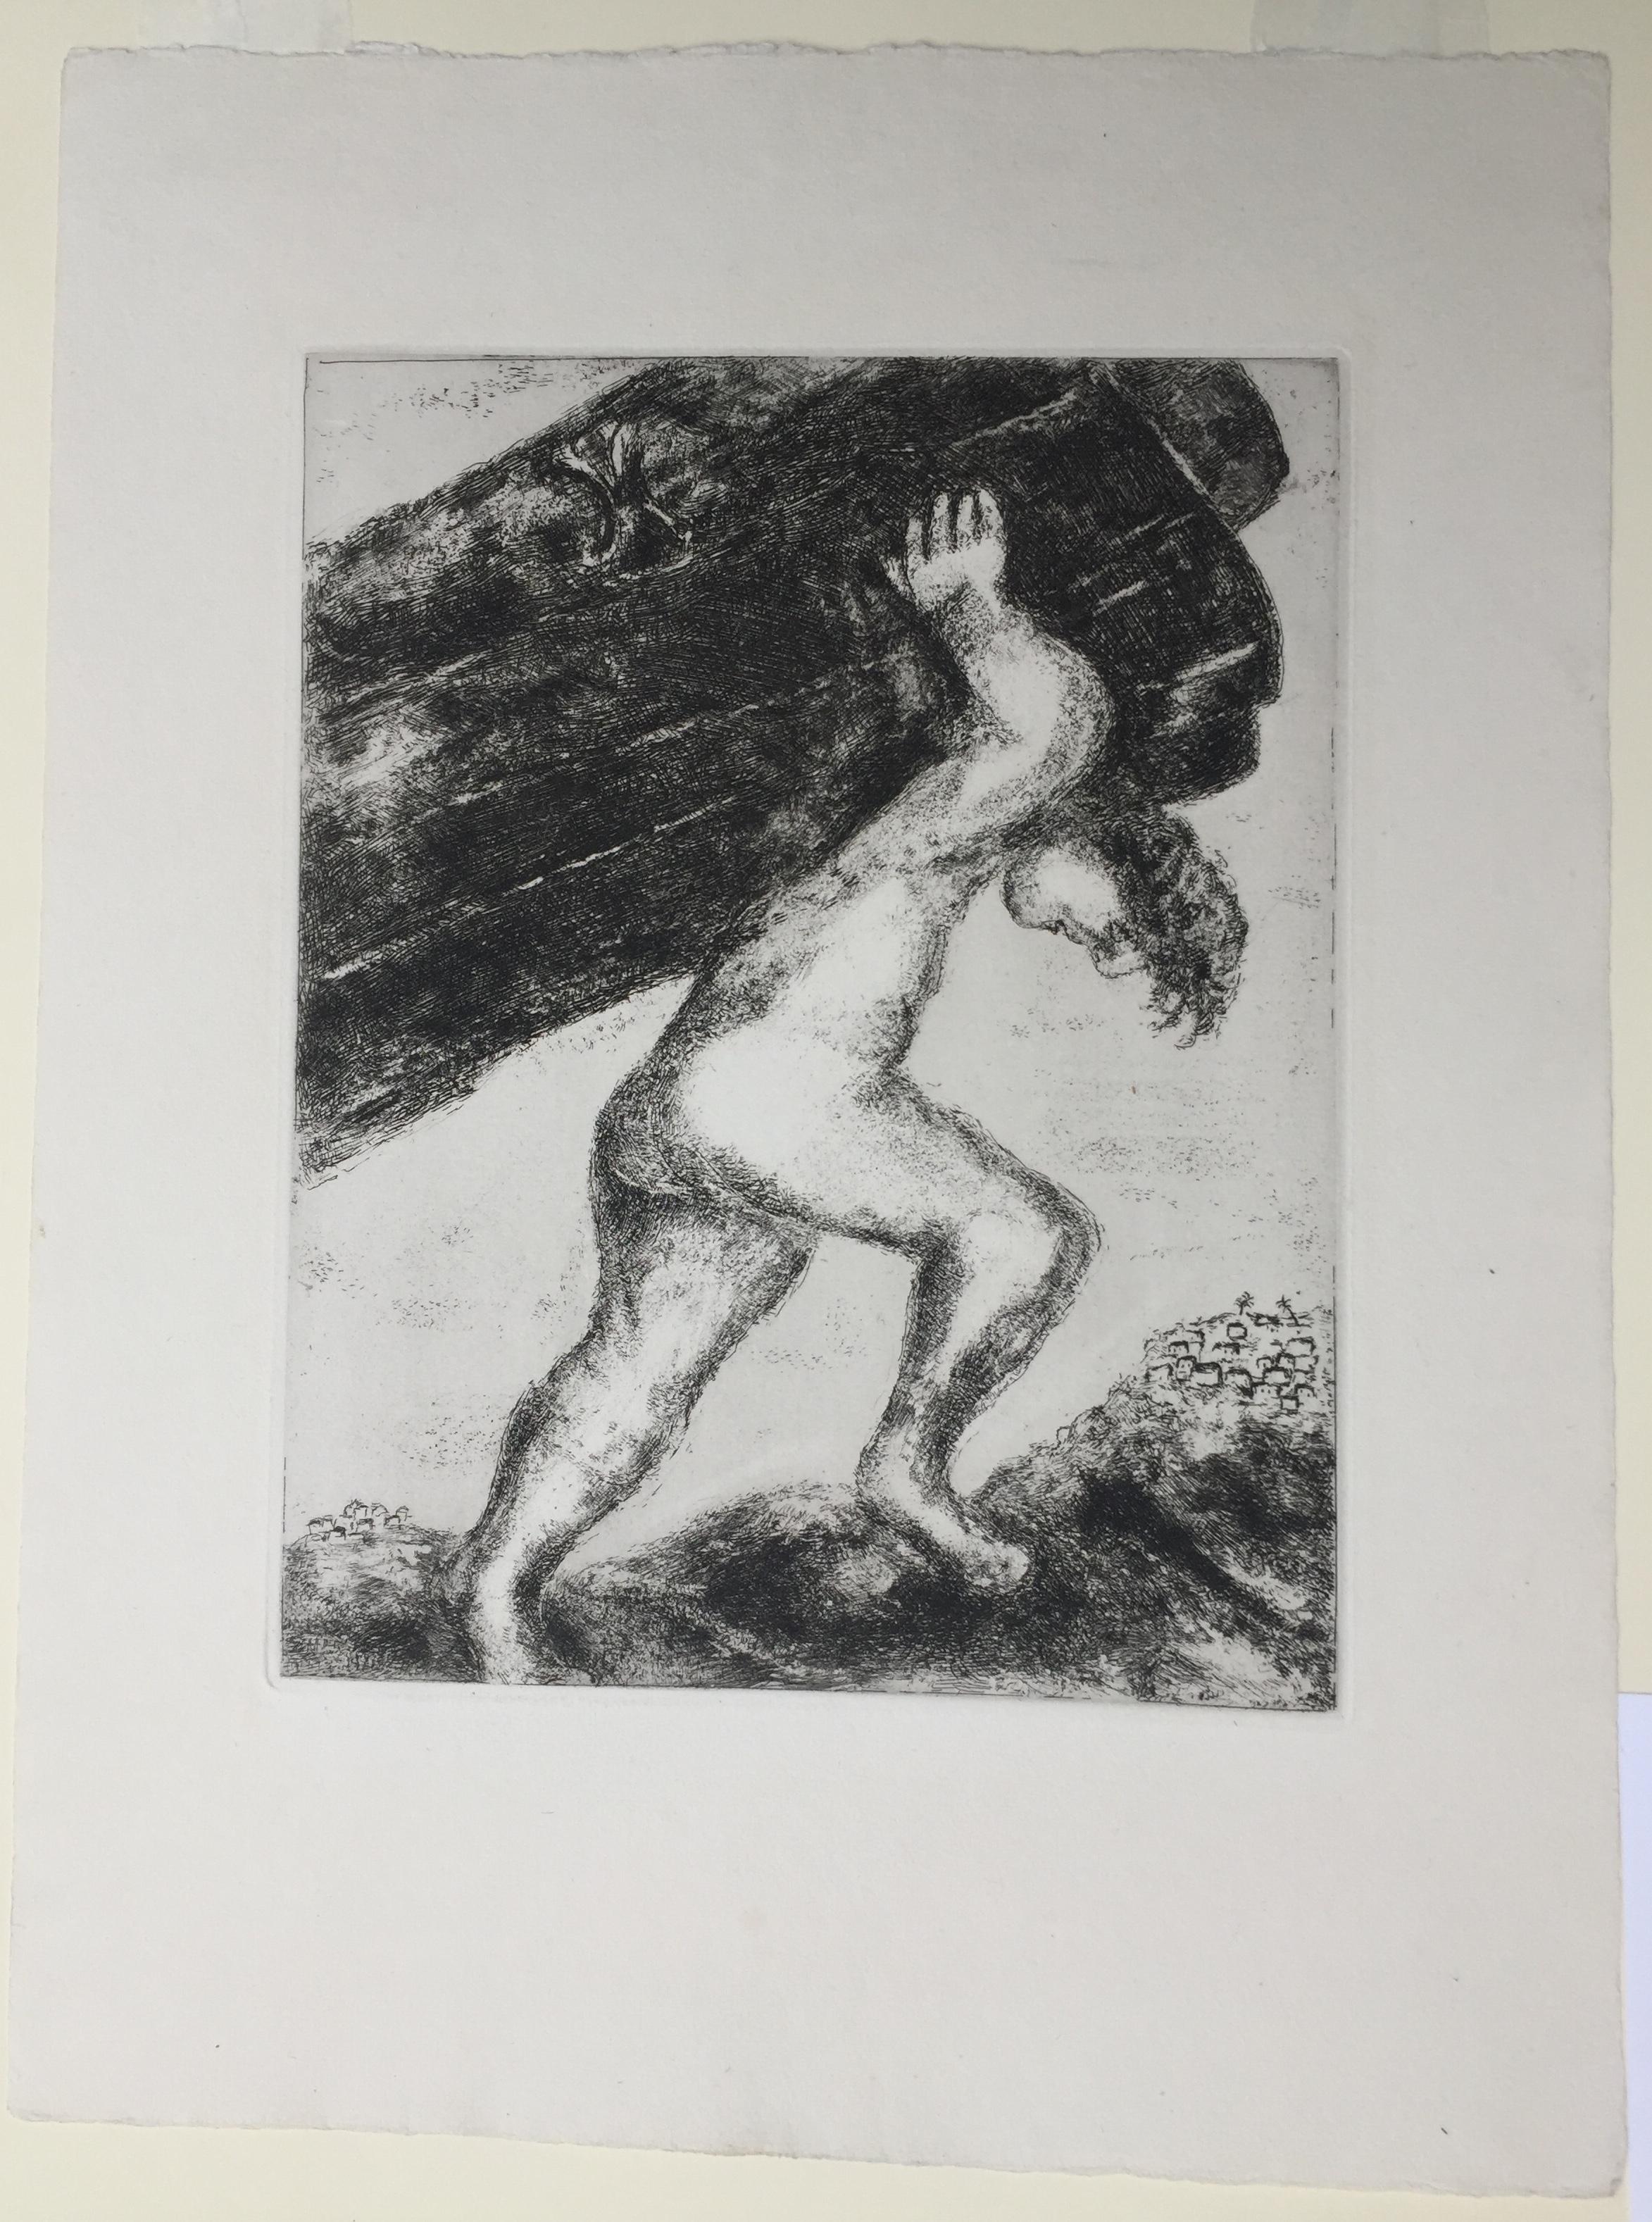 
MARC CHAGALL (1887 – 1985)

SAMSON CARRYING THE  GATES OF GAZA, 1956 (Cramer 29)
Etching and aquatint from the The Bible, Edition 275. Plate, 12 x 9